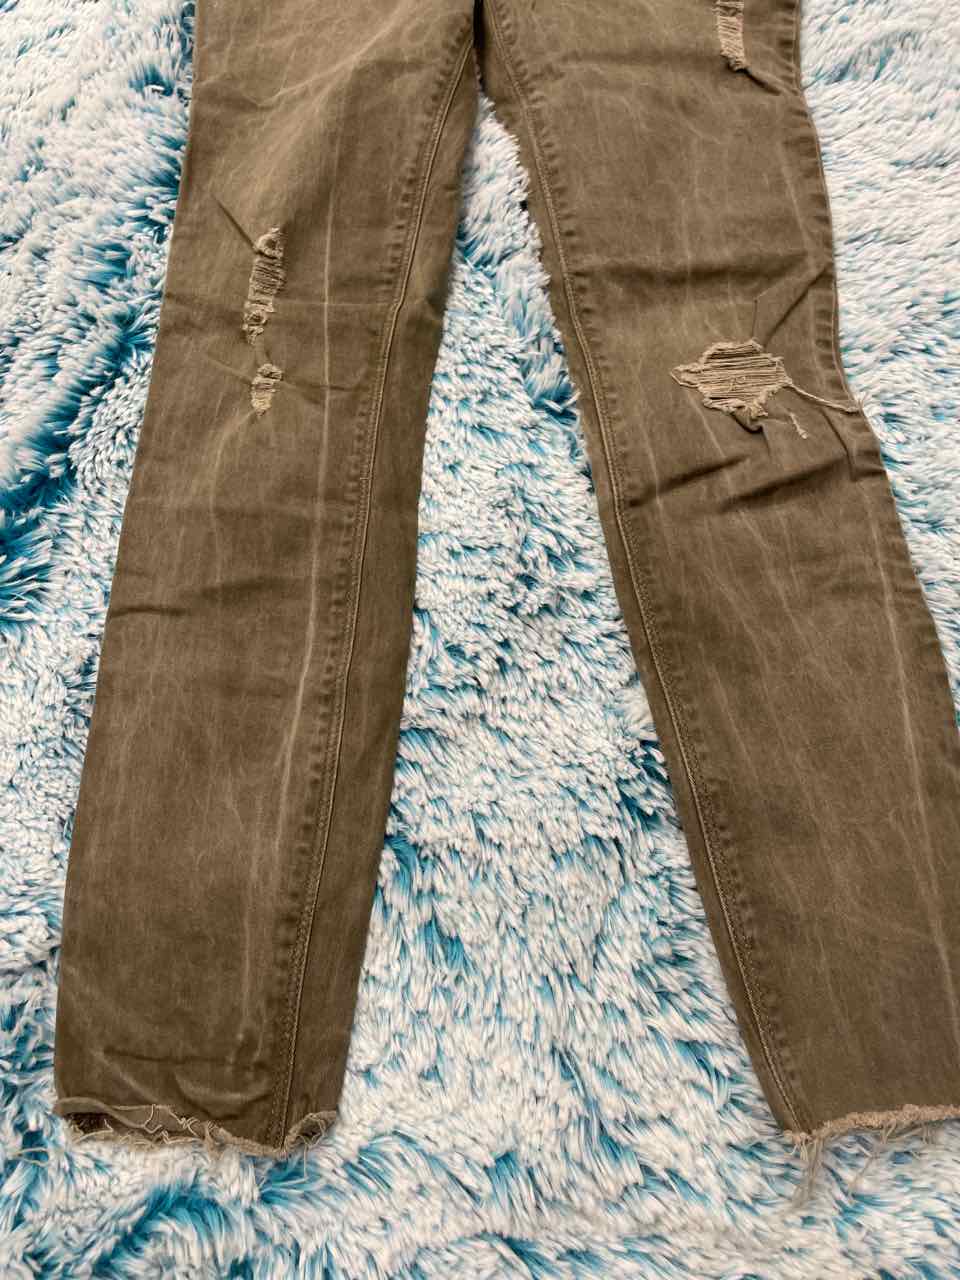 0 - Express Jeans